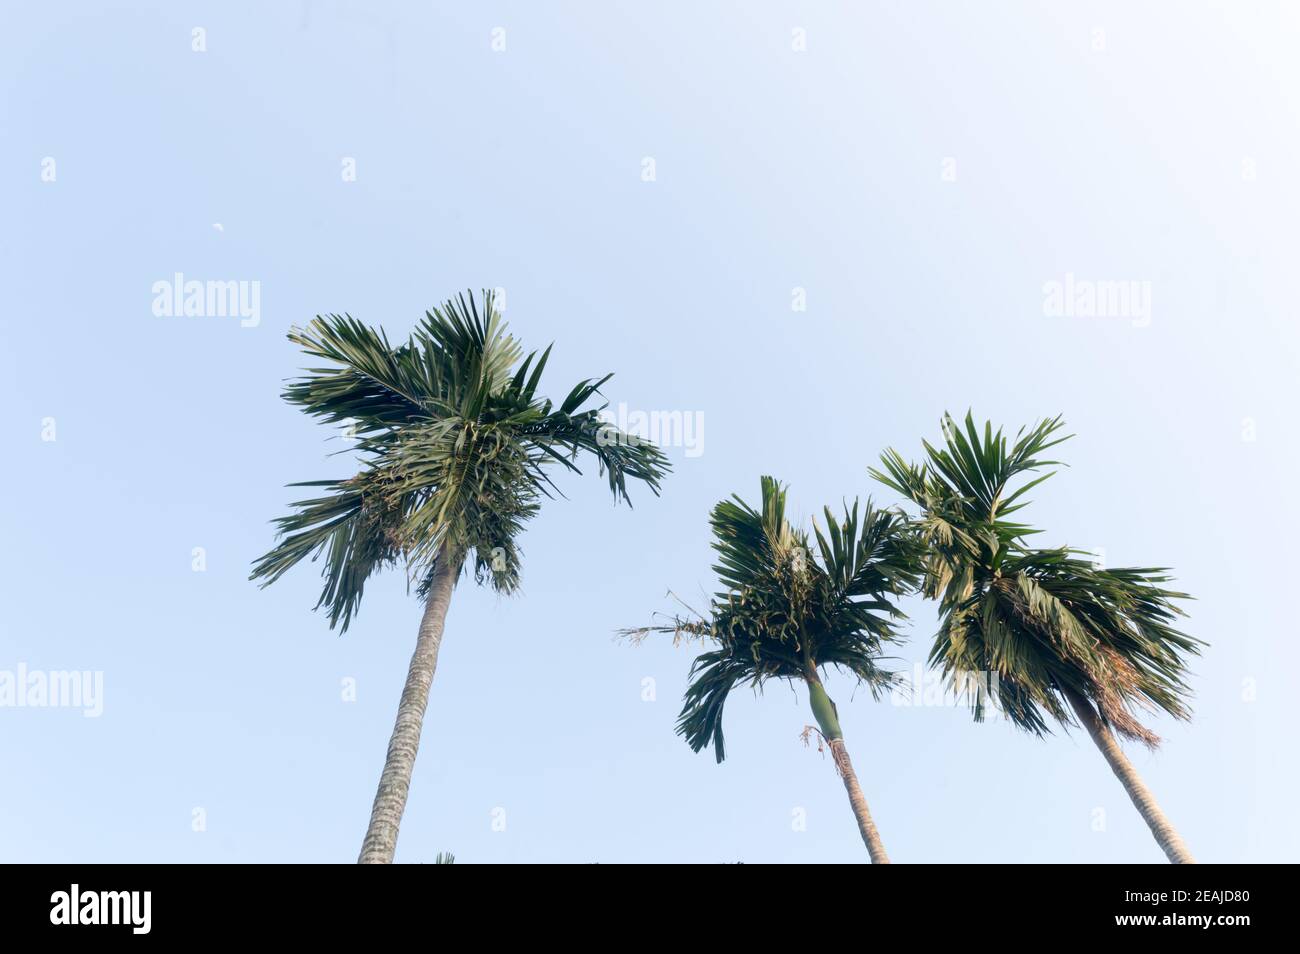 The Areca palm tree (Areca nut) against vibrant blue color sunset sky in summer illuminated by sunlight. Low angel View. Beauty in nature seasonal theme Background image. Kolkata India. Stock Photo